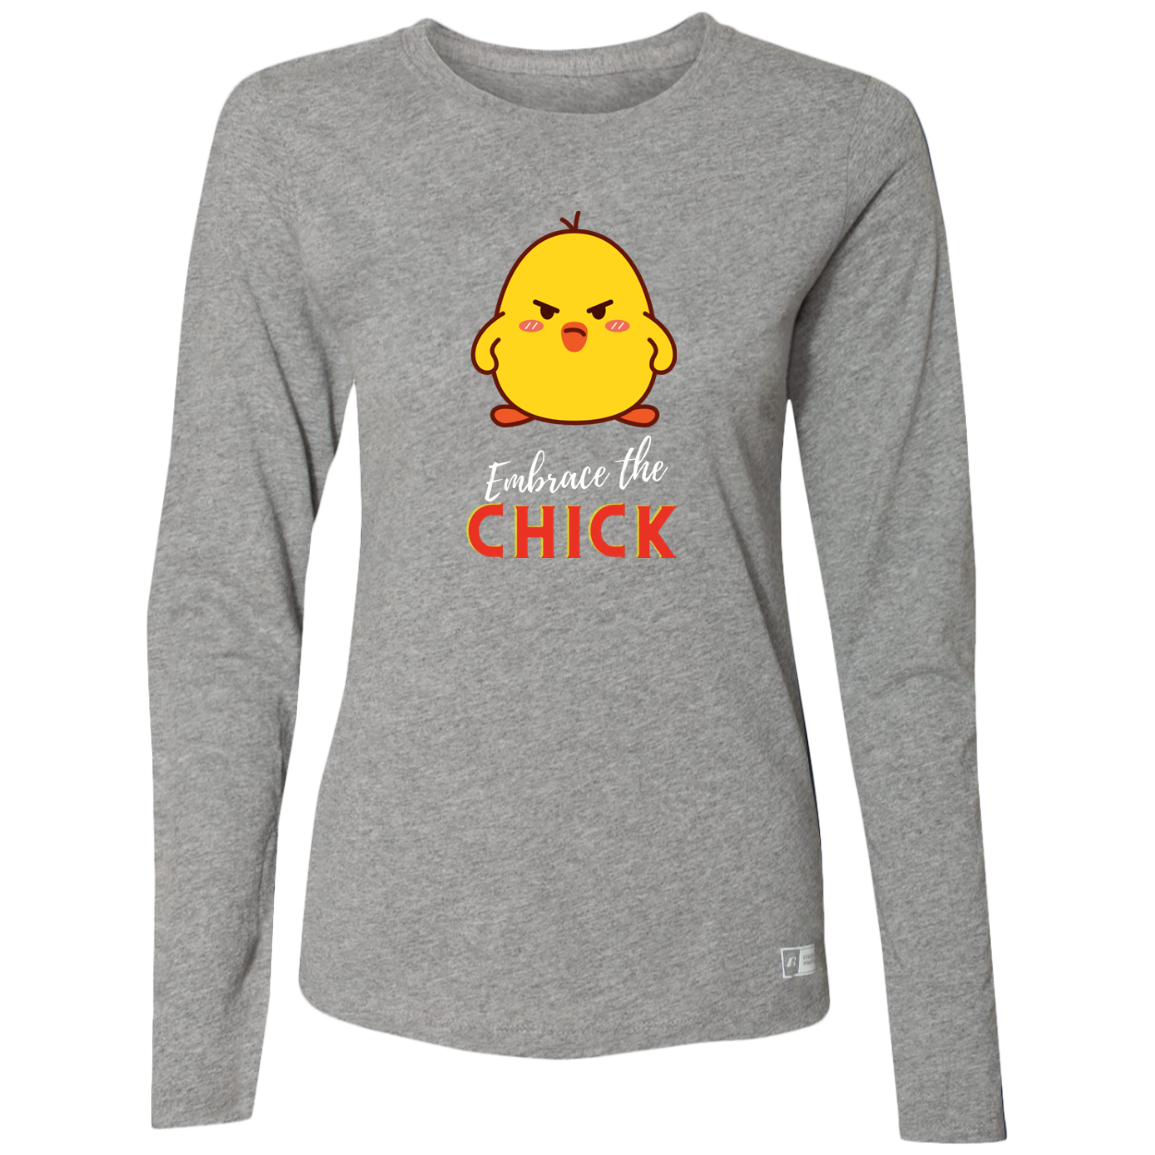 Embrace the Chick - Women's, Ladies’ Essential Dri-Power Long Sleeve Tee